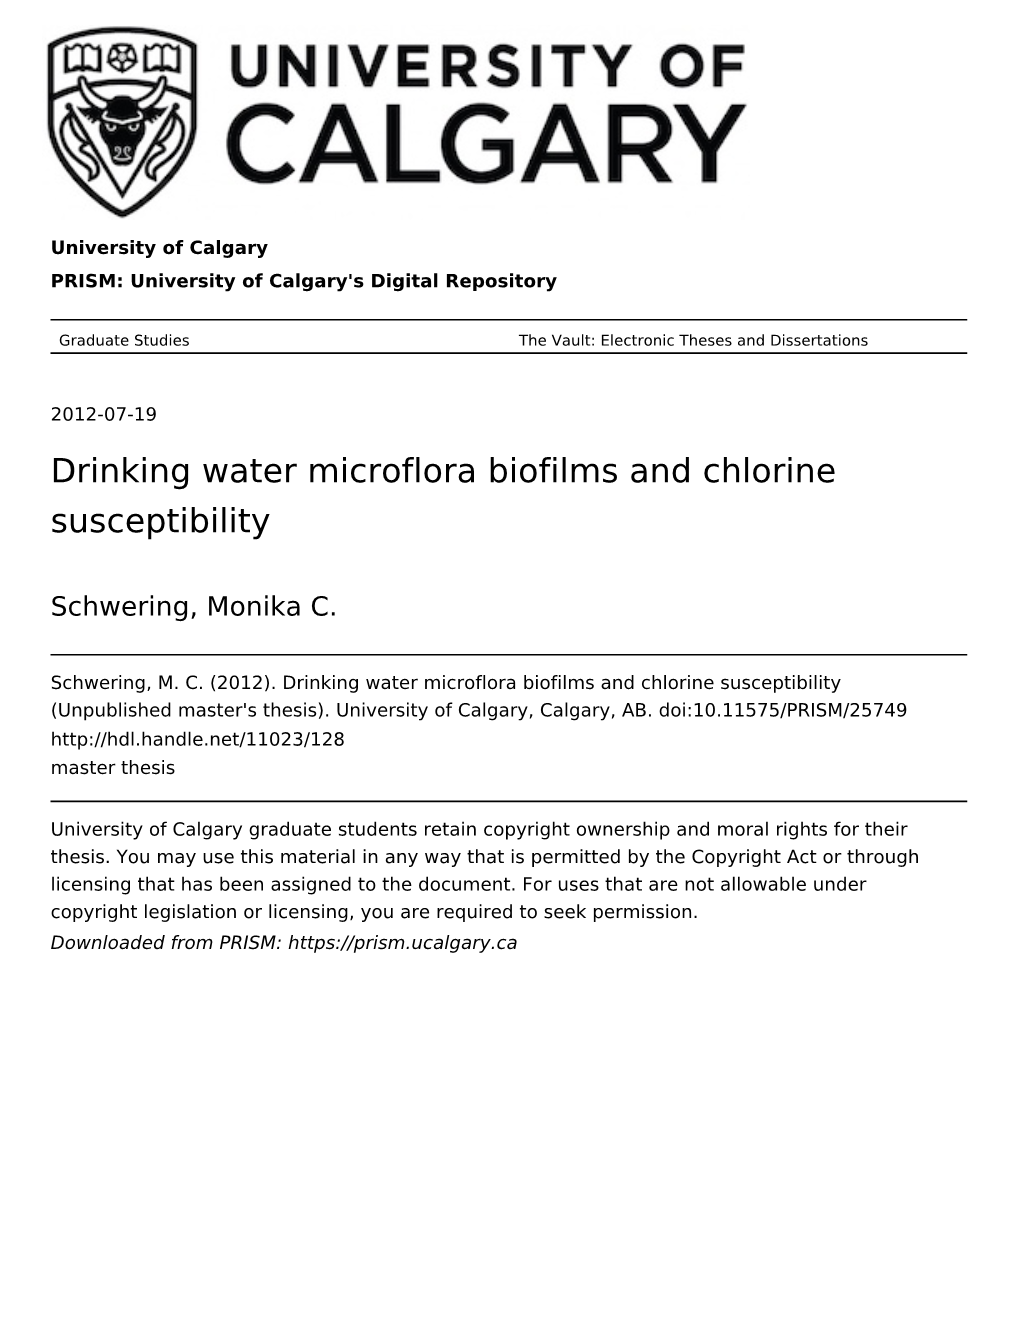 Drinking Water Microflora Biofilms and Chlorine Susceptibility